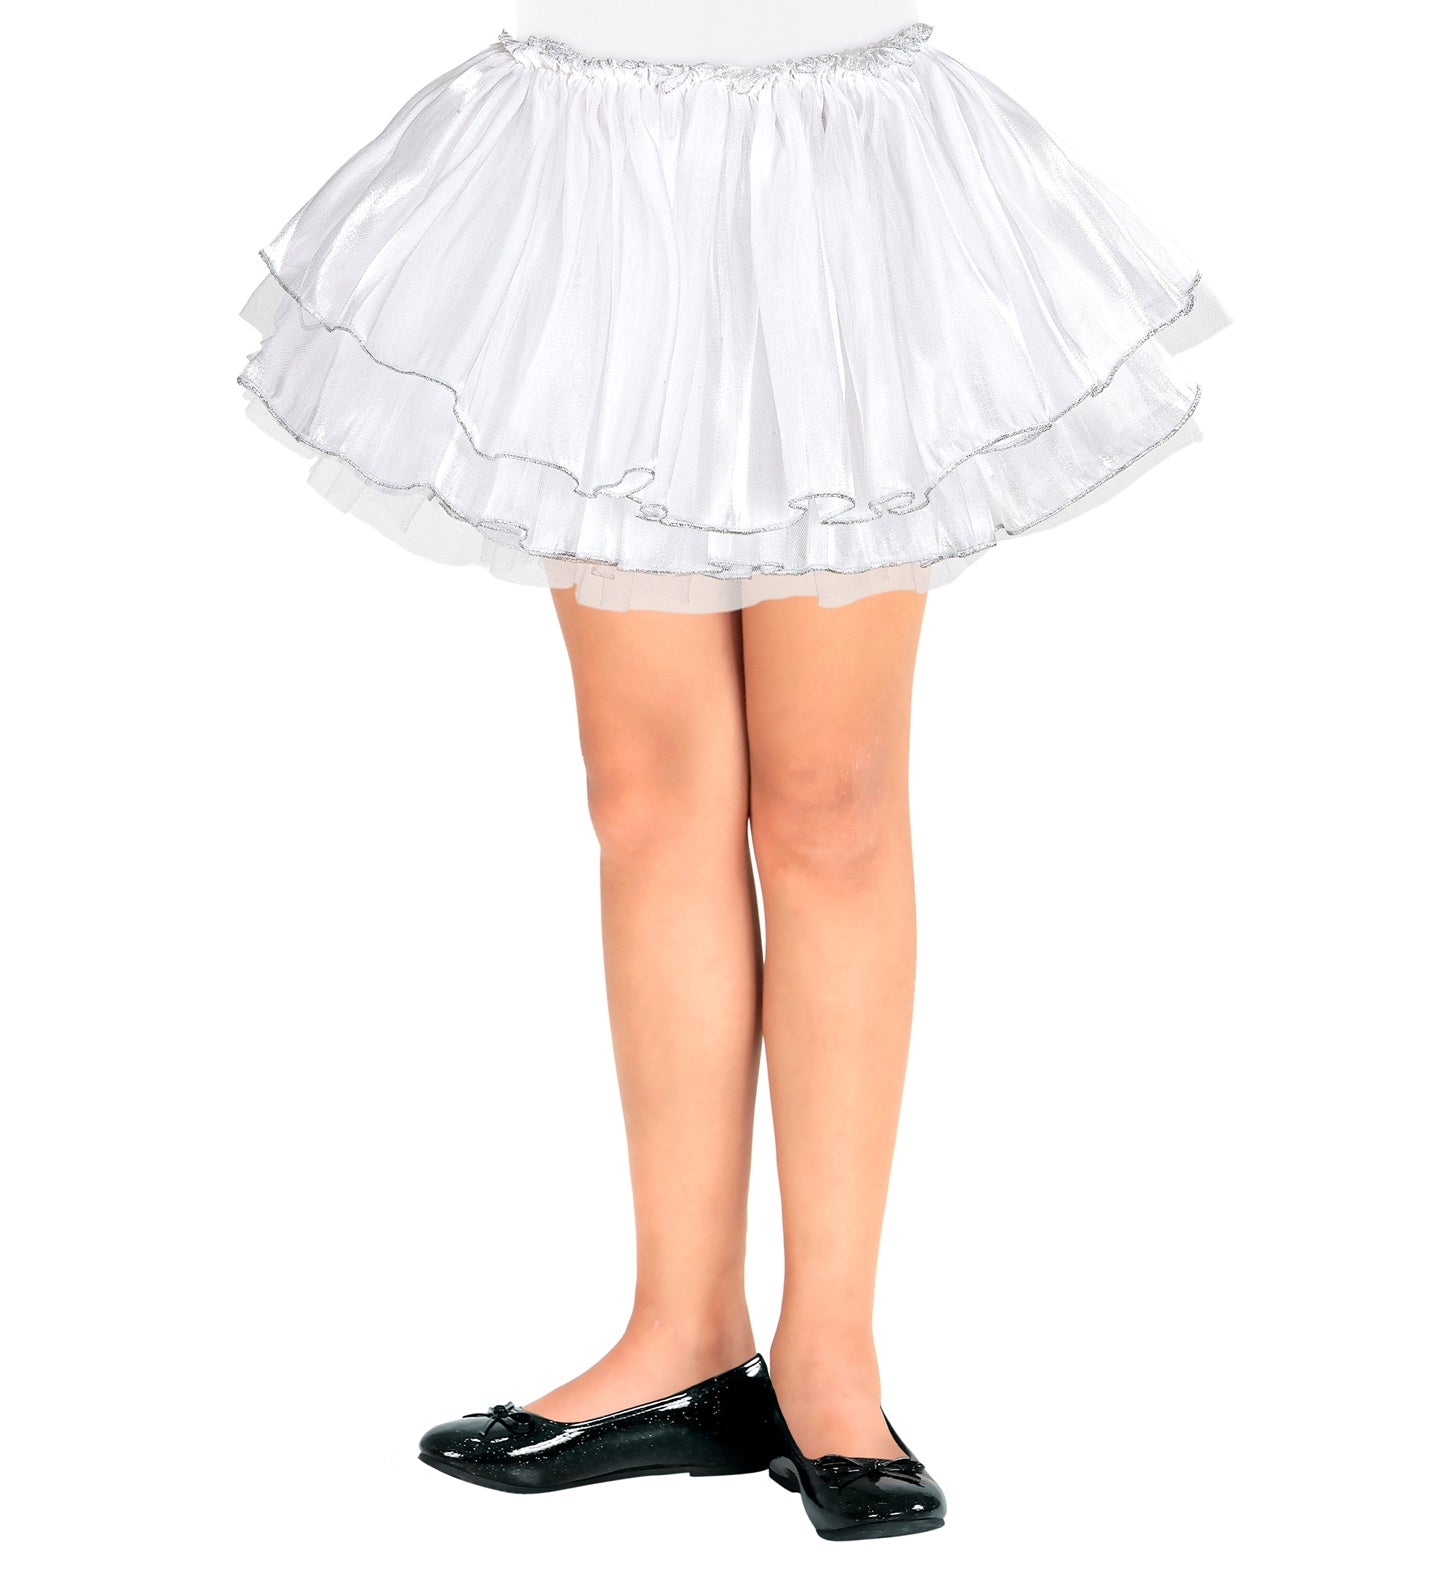 White Satin and Tulle Tutu Childs